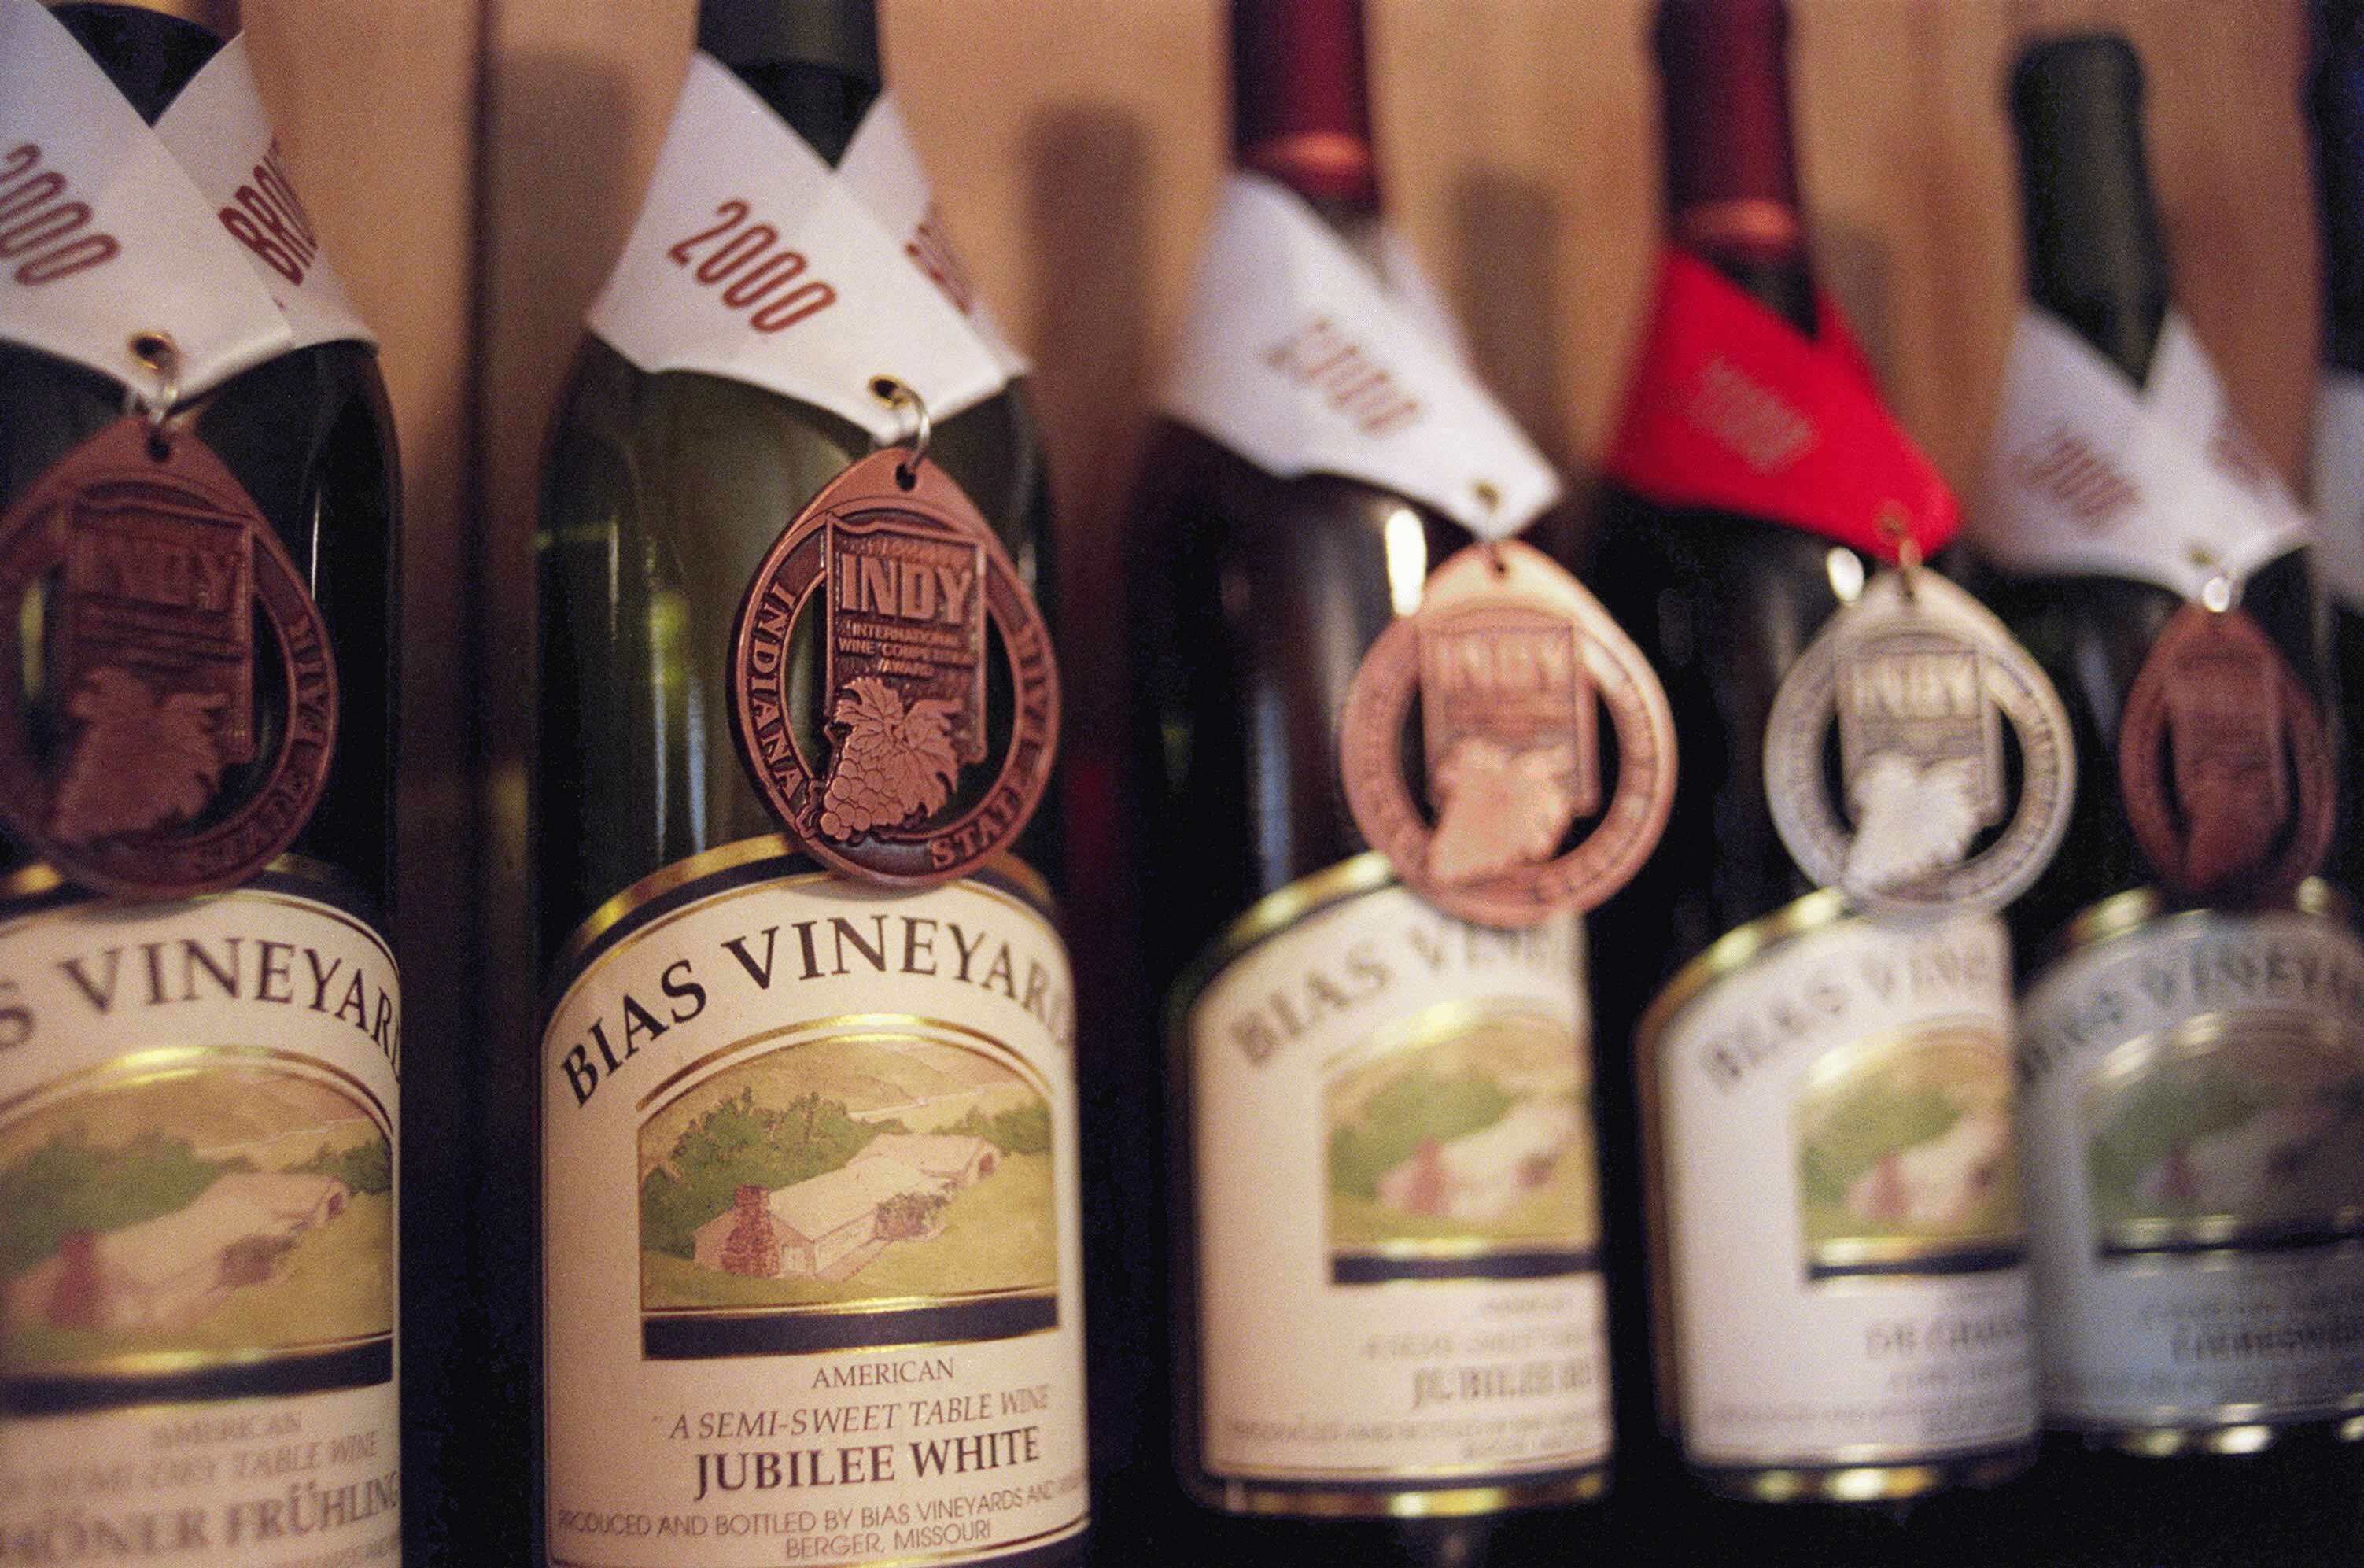 Bias Winery & Gruhlke's Microbrewery - indoor photo, a closeup of several bottles of wine which have awards on them.